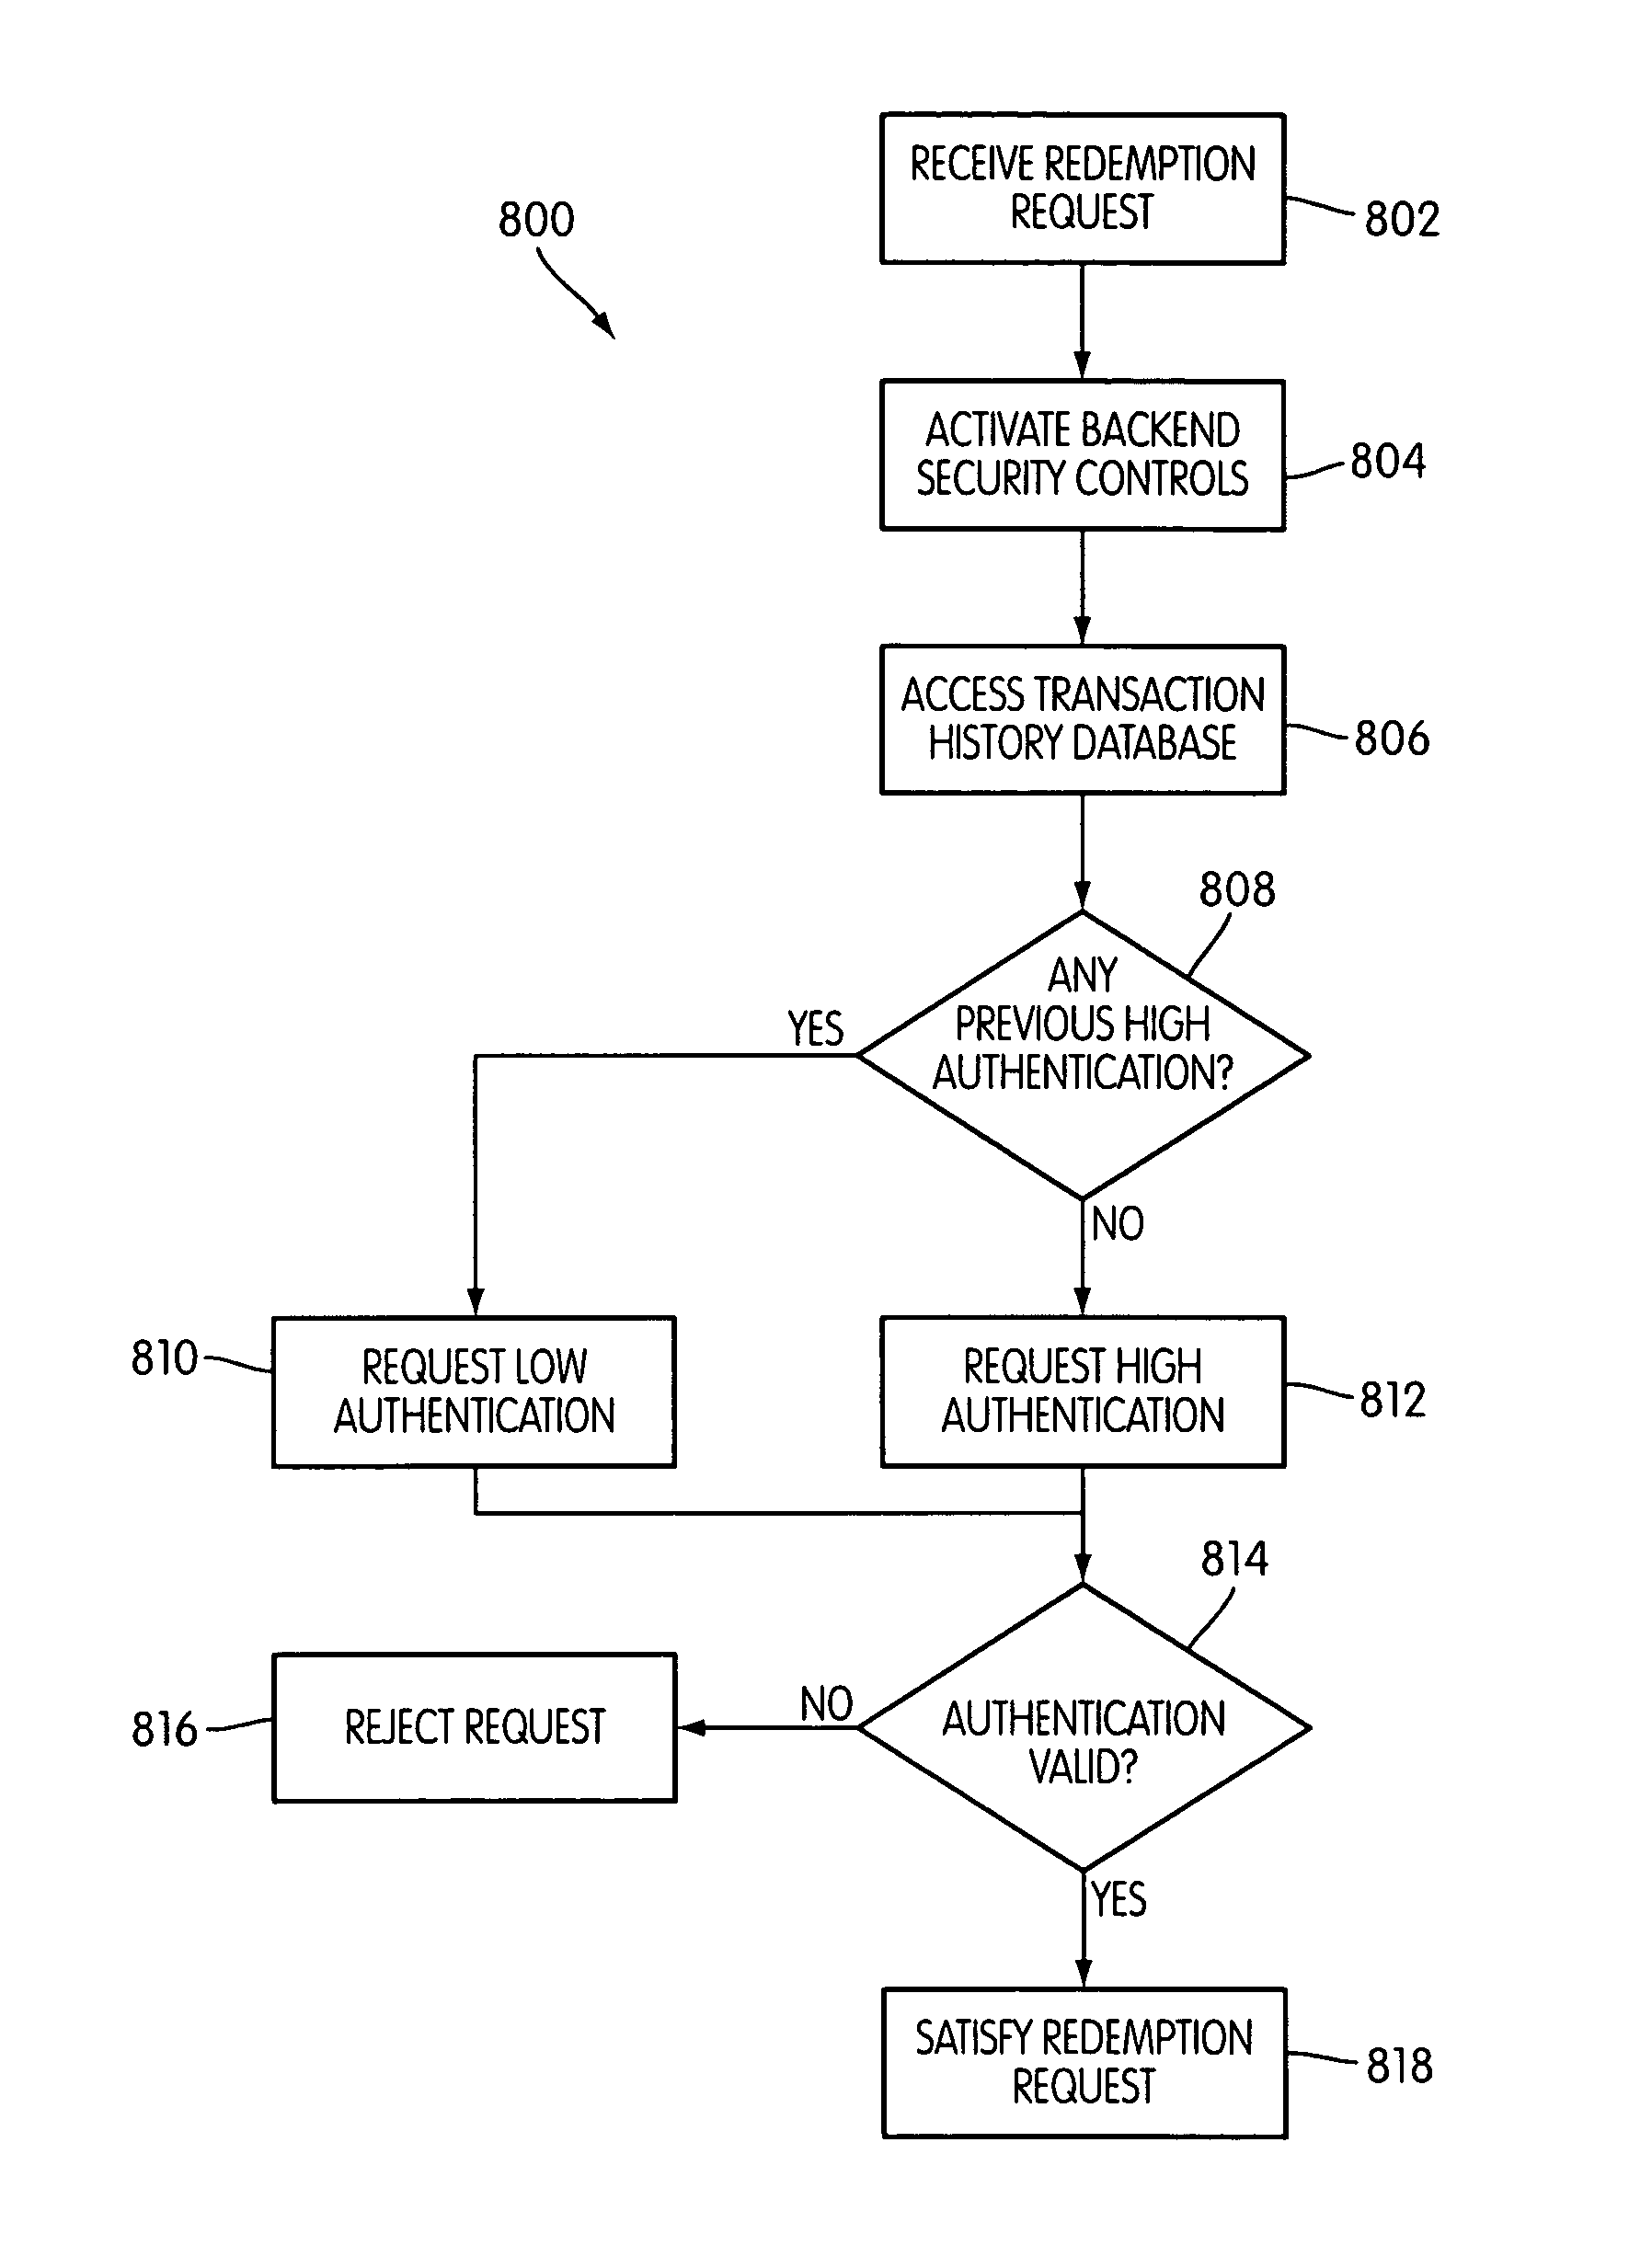 System and method for determining the level of a authentication required for redeeming a customer's award credits